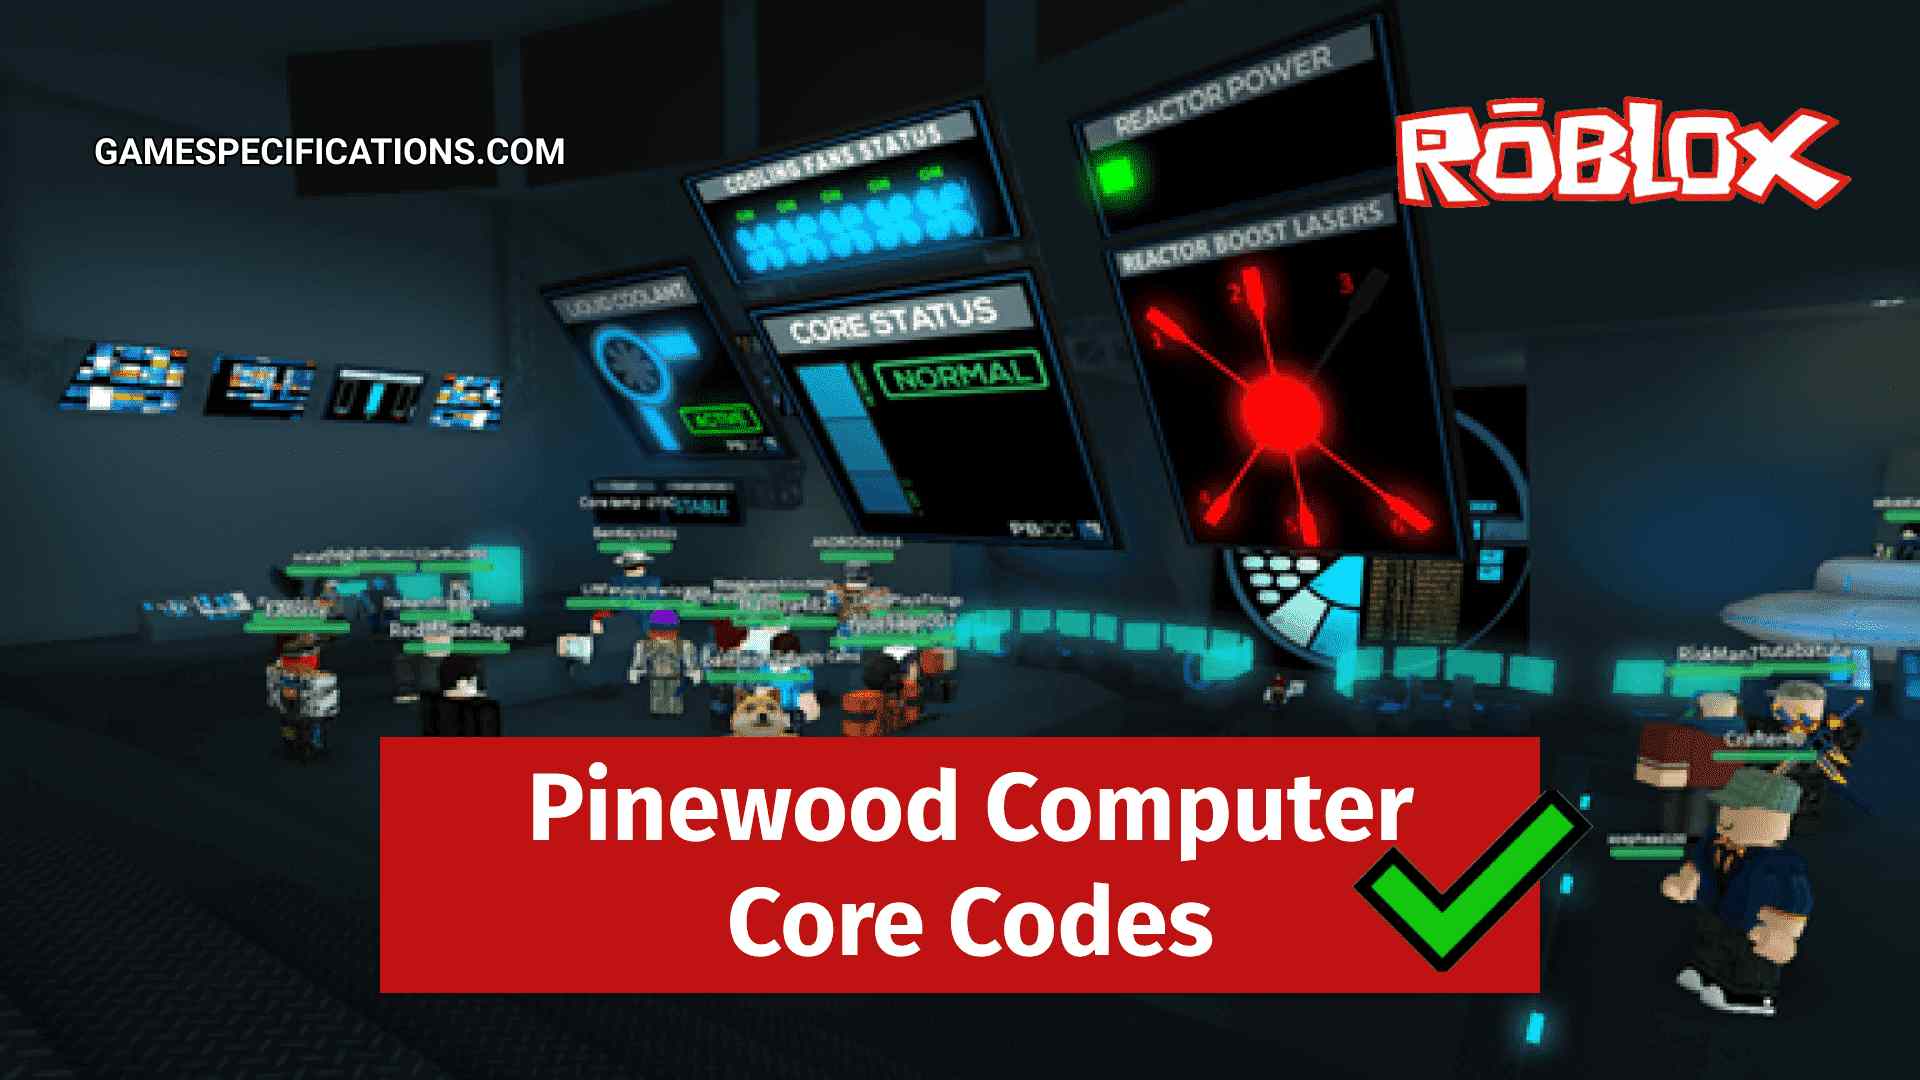 Roblox Pinewood Computer Core Codes July 2021 Game Specifications - no guidance roblox id code 2020